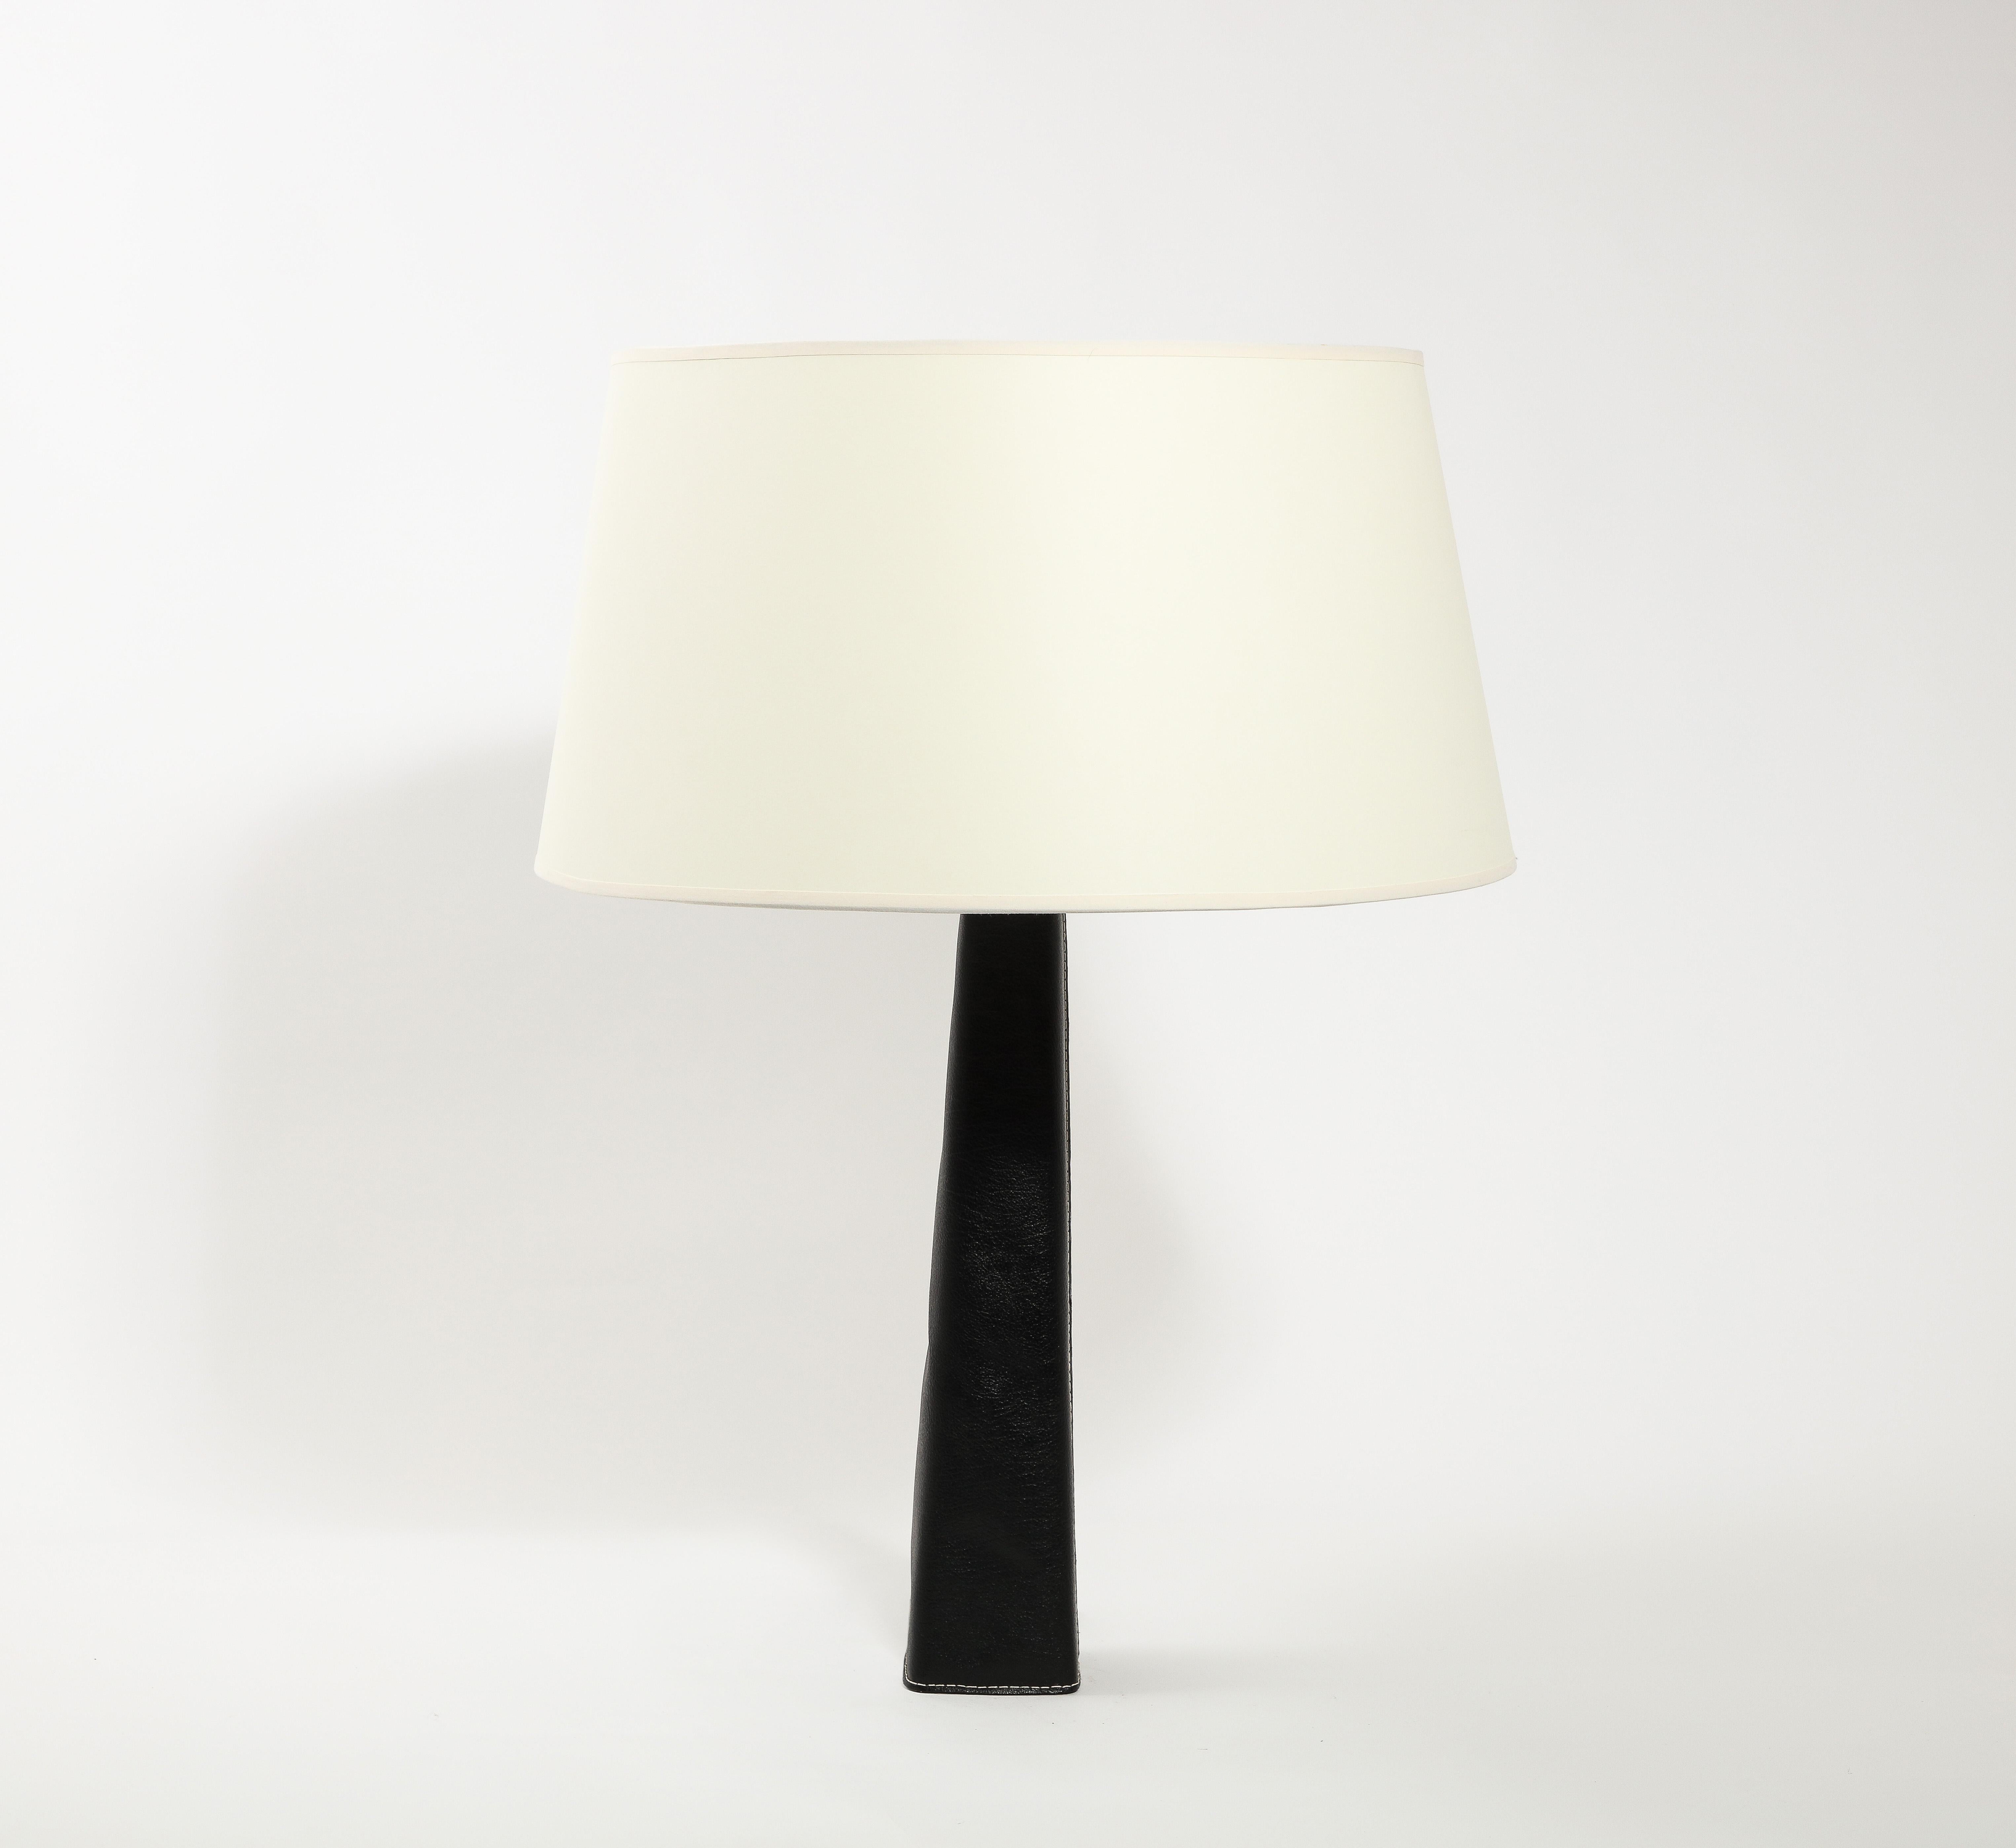 Learthe Covered Table Lamp by Metalarte, Spain 1970's For Sale 6